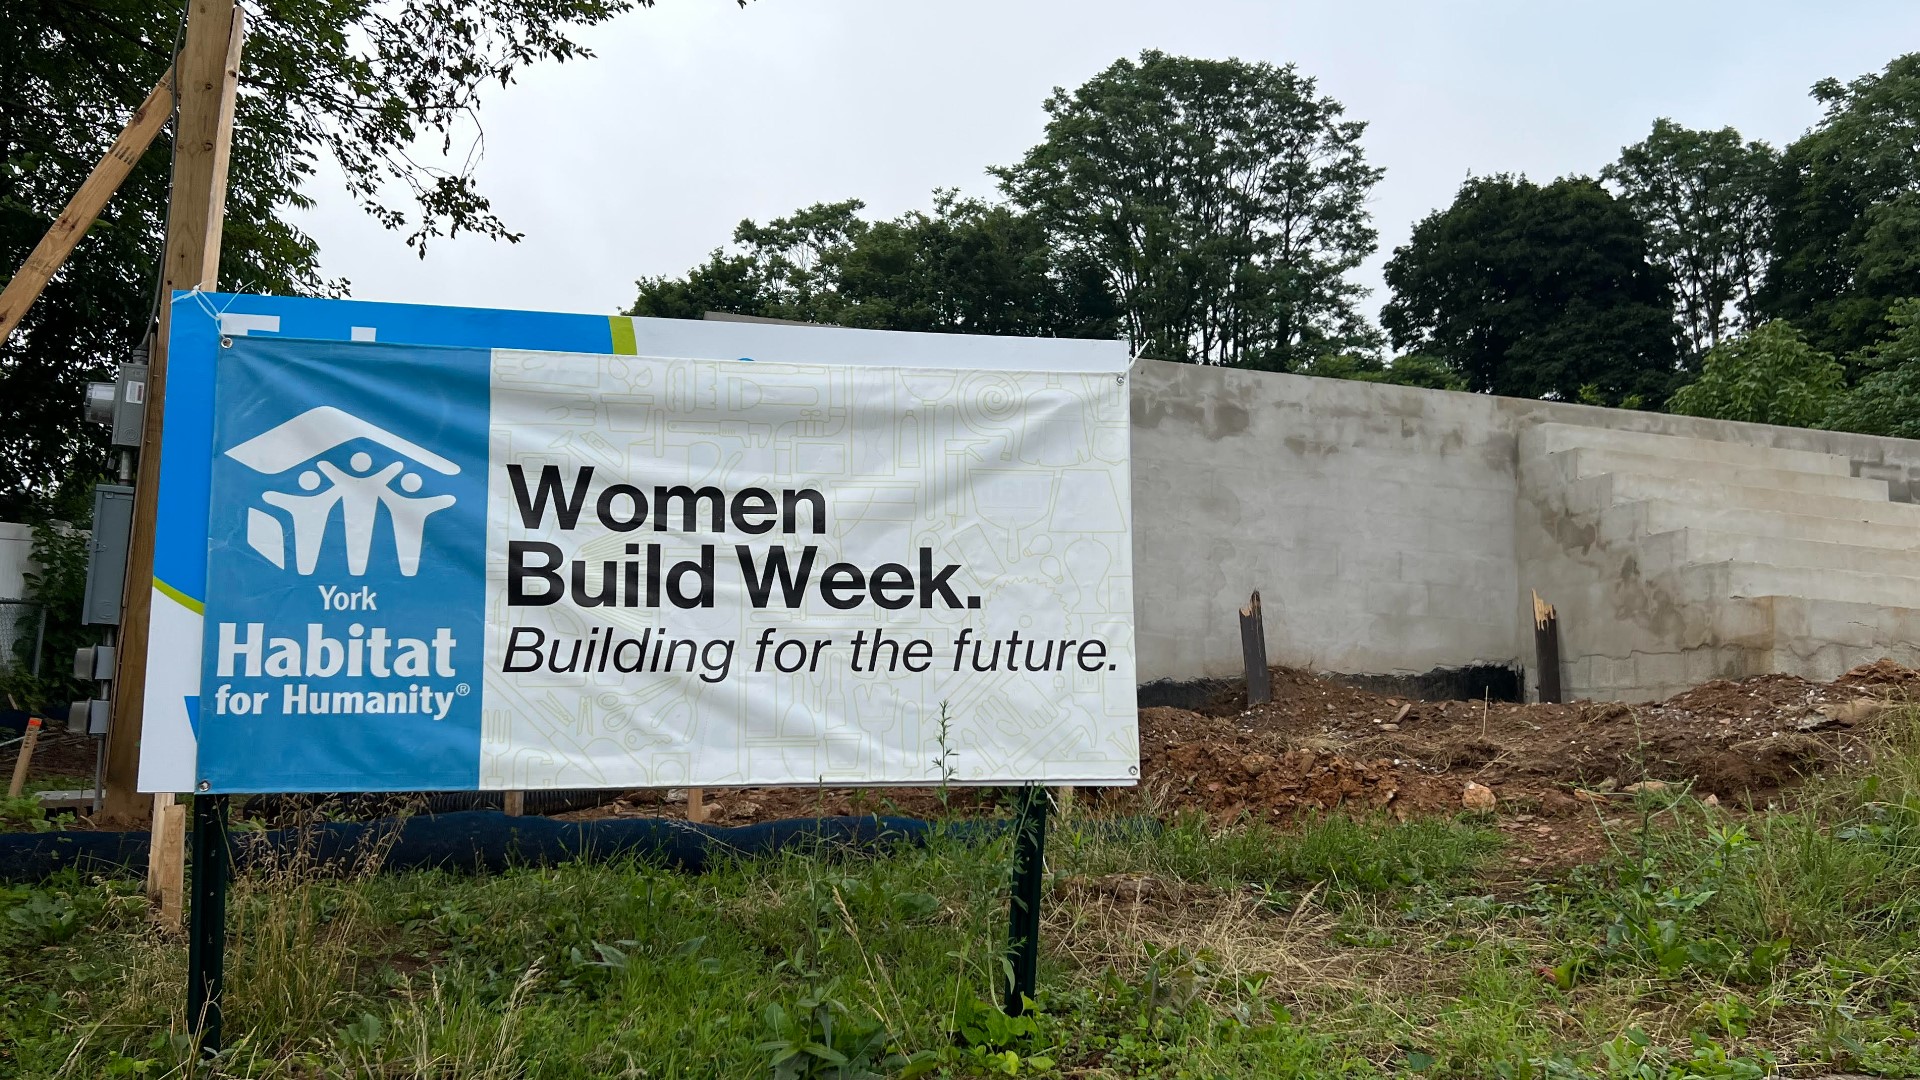 A number of women and organizations will roll up their sleeves for Women Build Week.